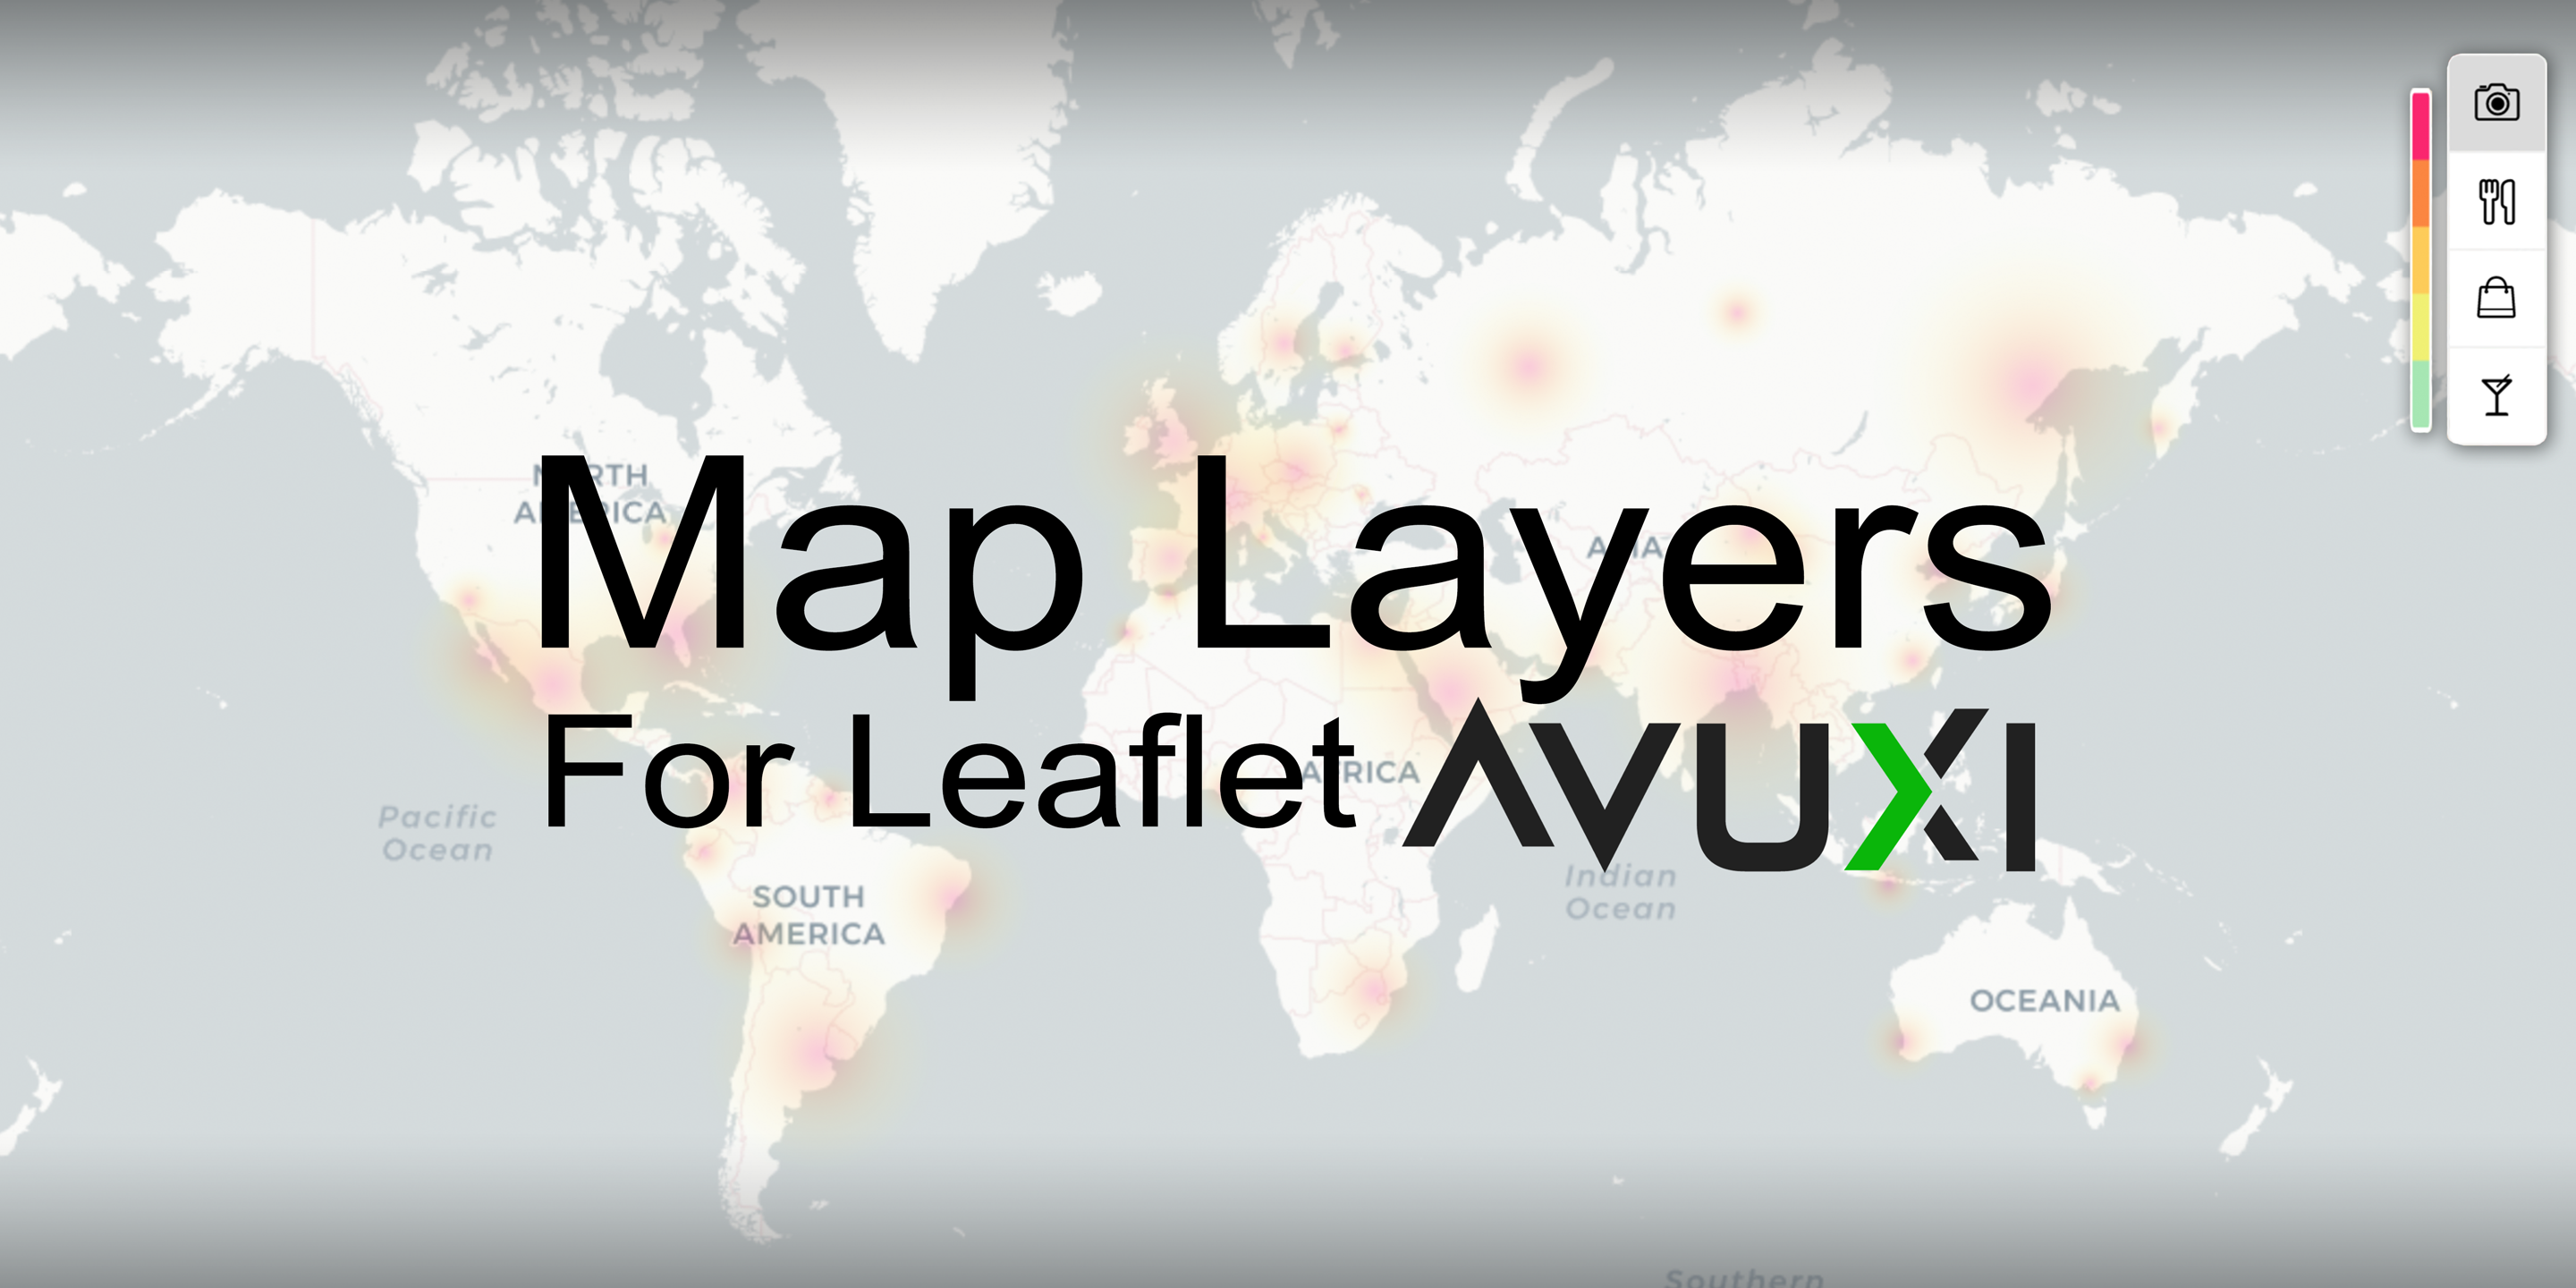 Map Layers for Leaflet from AVUXI